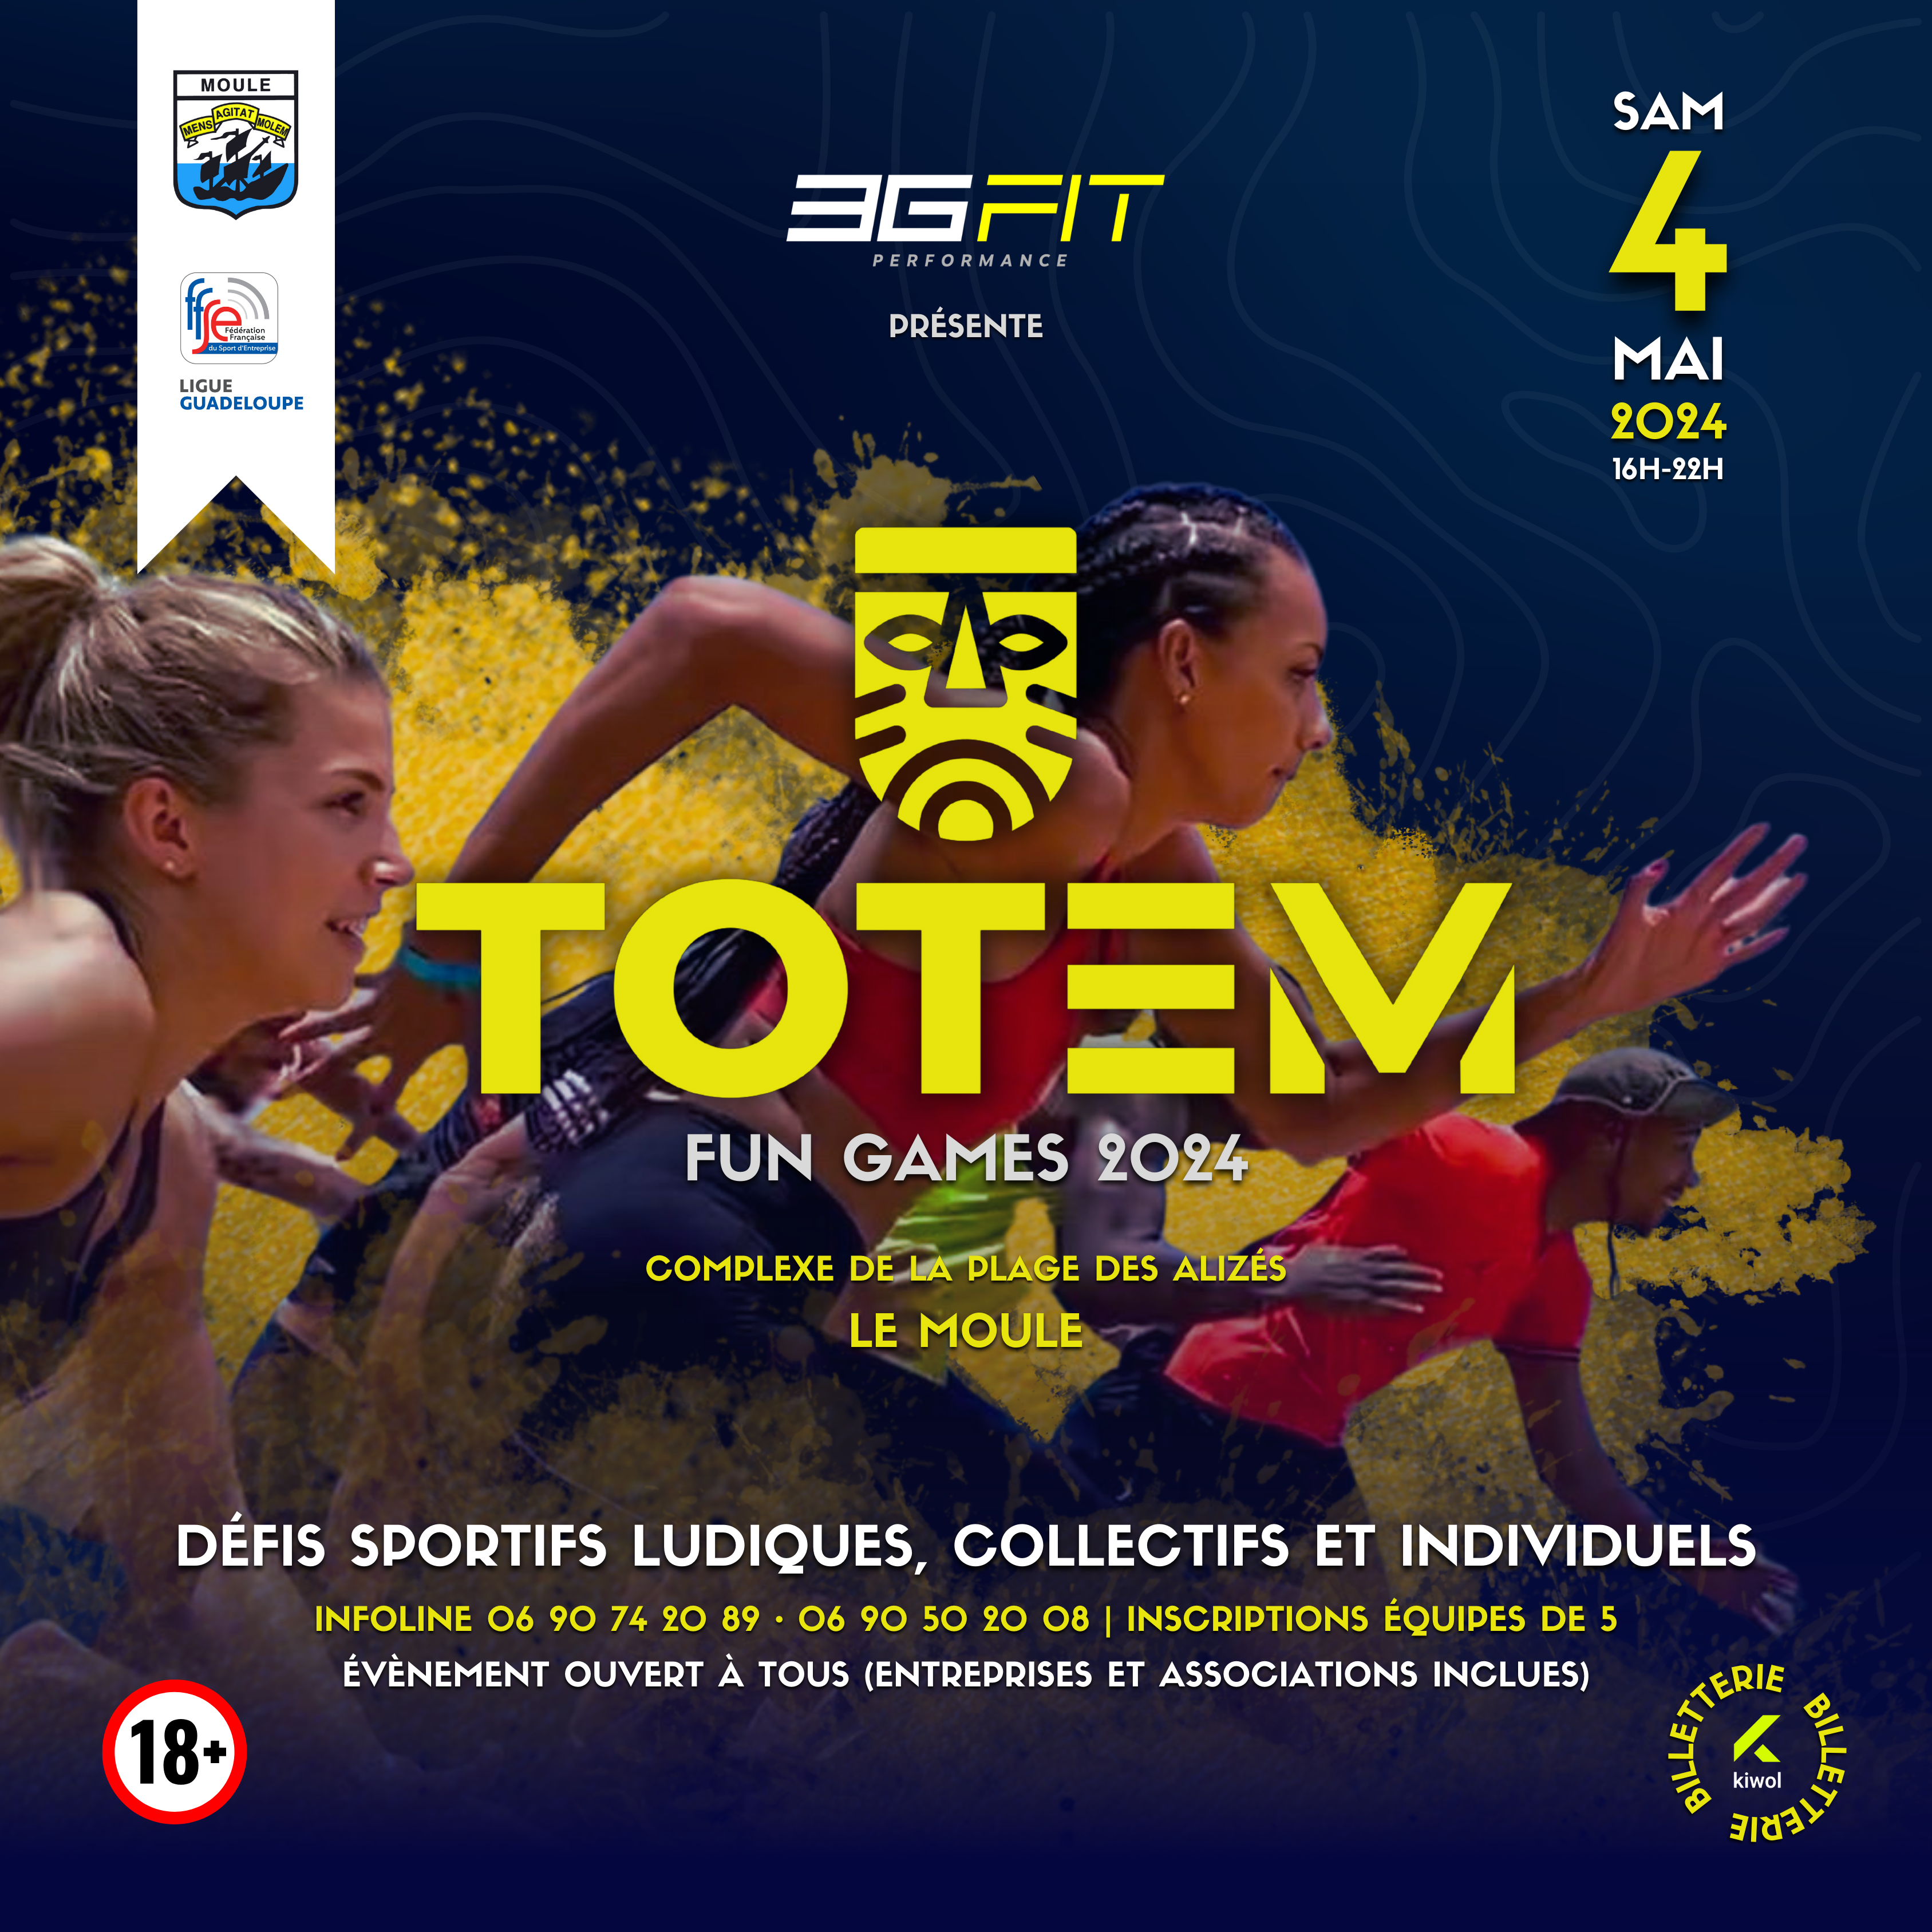 TOTEM - FUN GAMES 2024 by 3G FIT PERFORMANCE